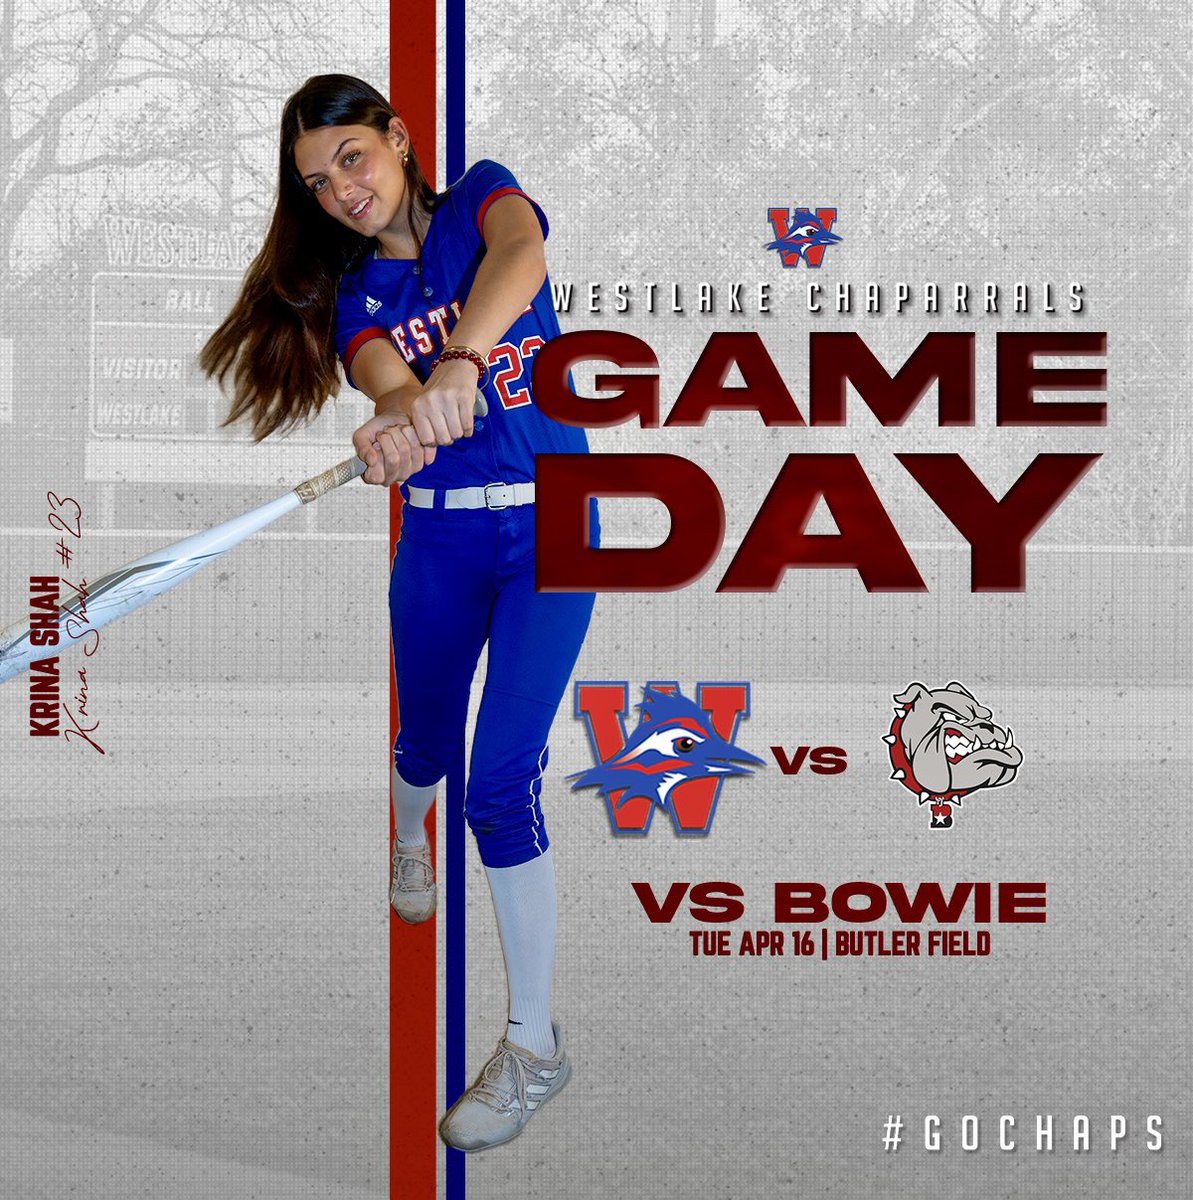 Softball is back on the diamond after going 2-1 last week with wins over Anderson and Austin High. Tonight, the Chaps head to Butler Field to battle Bowie. First pitch is scheduled for 7pm. #GoChaps